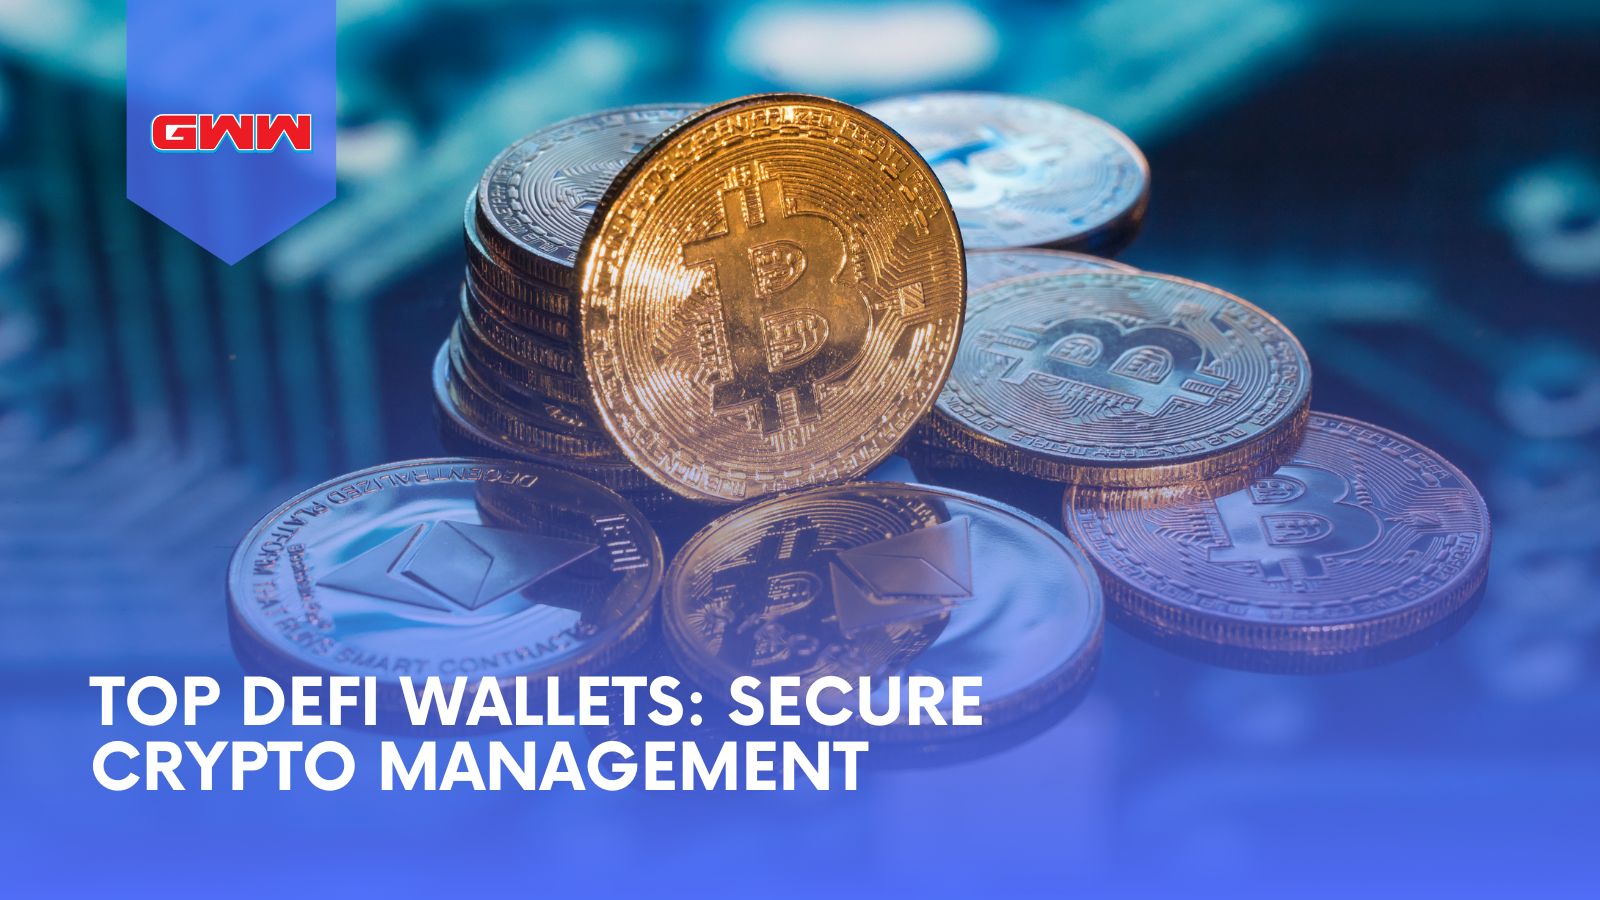 Top DeFi Wallets: Secure Crypto Management